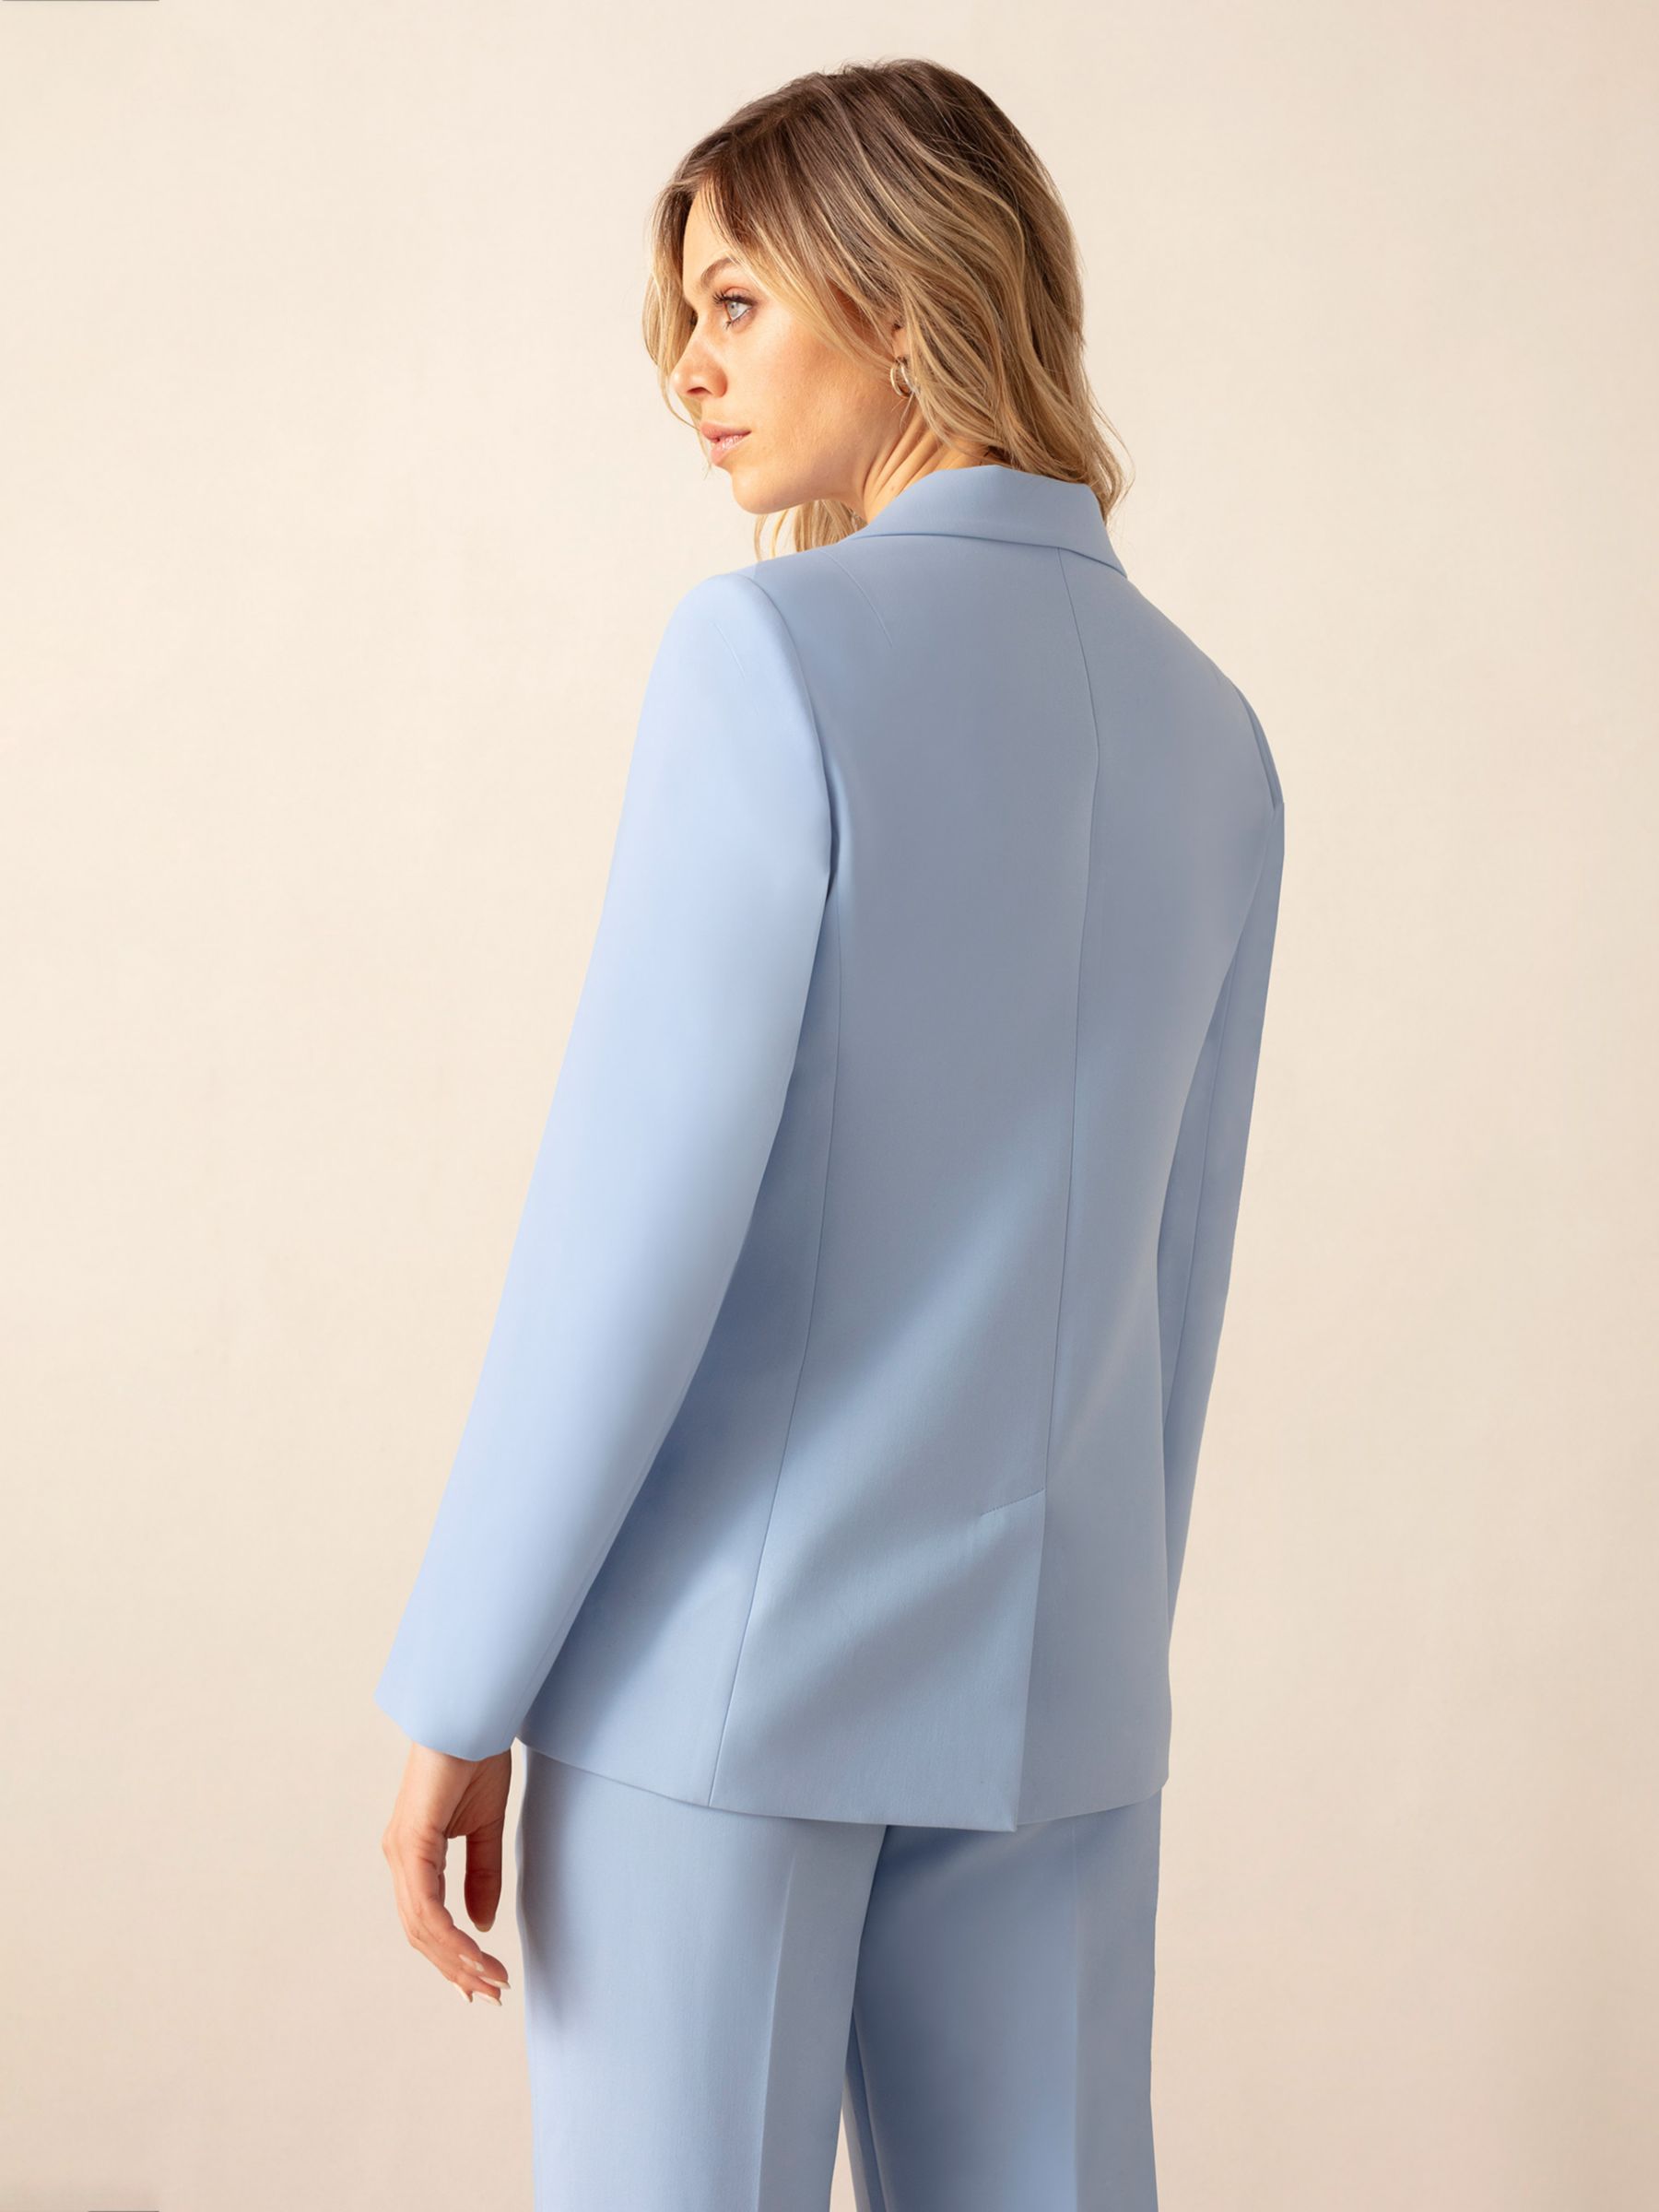 Buy Ro&Zo Double Breasted Blazer, Blue Online at johnlewis.com